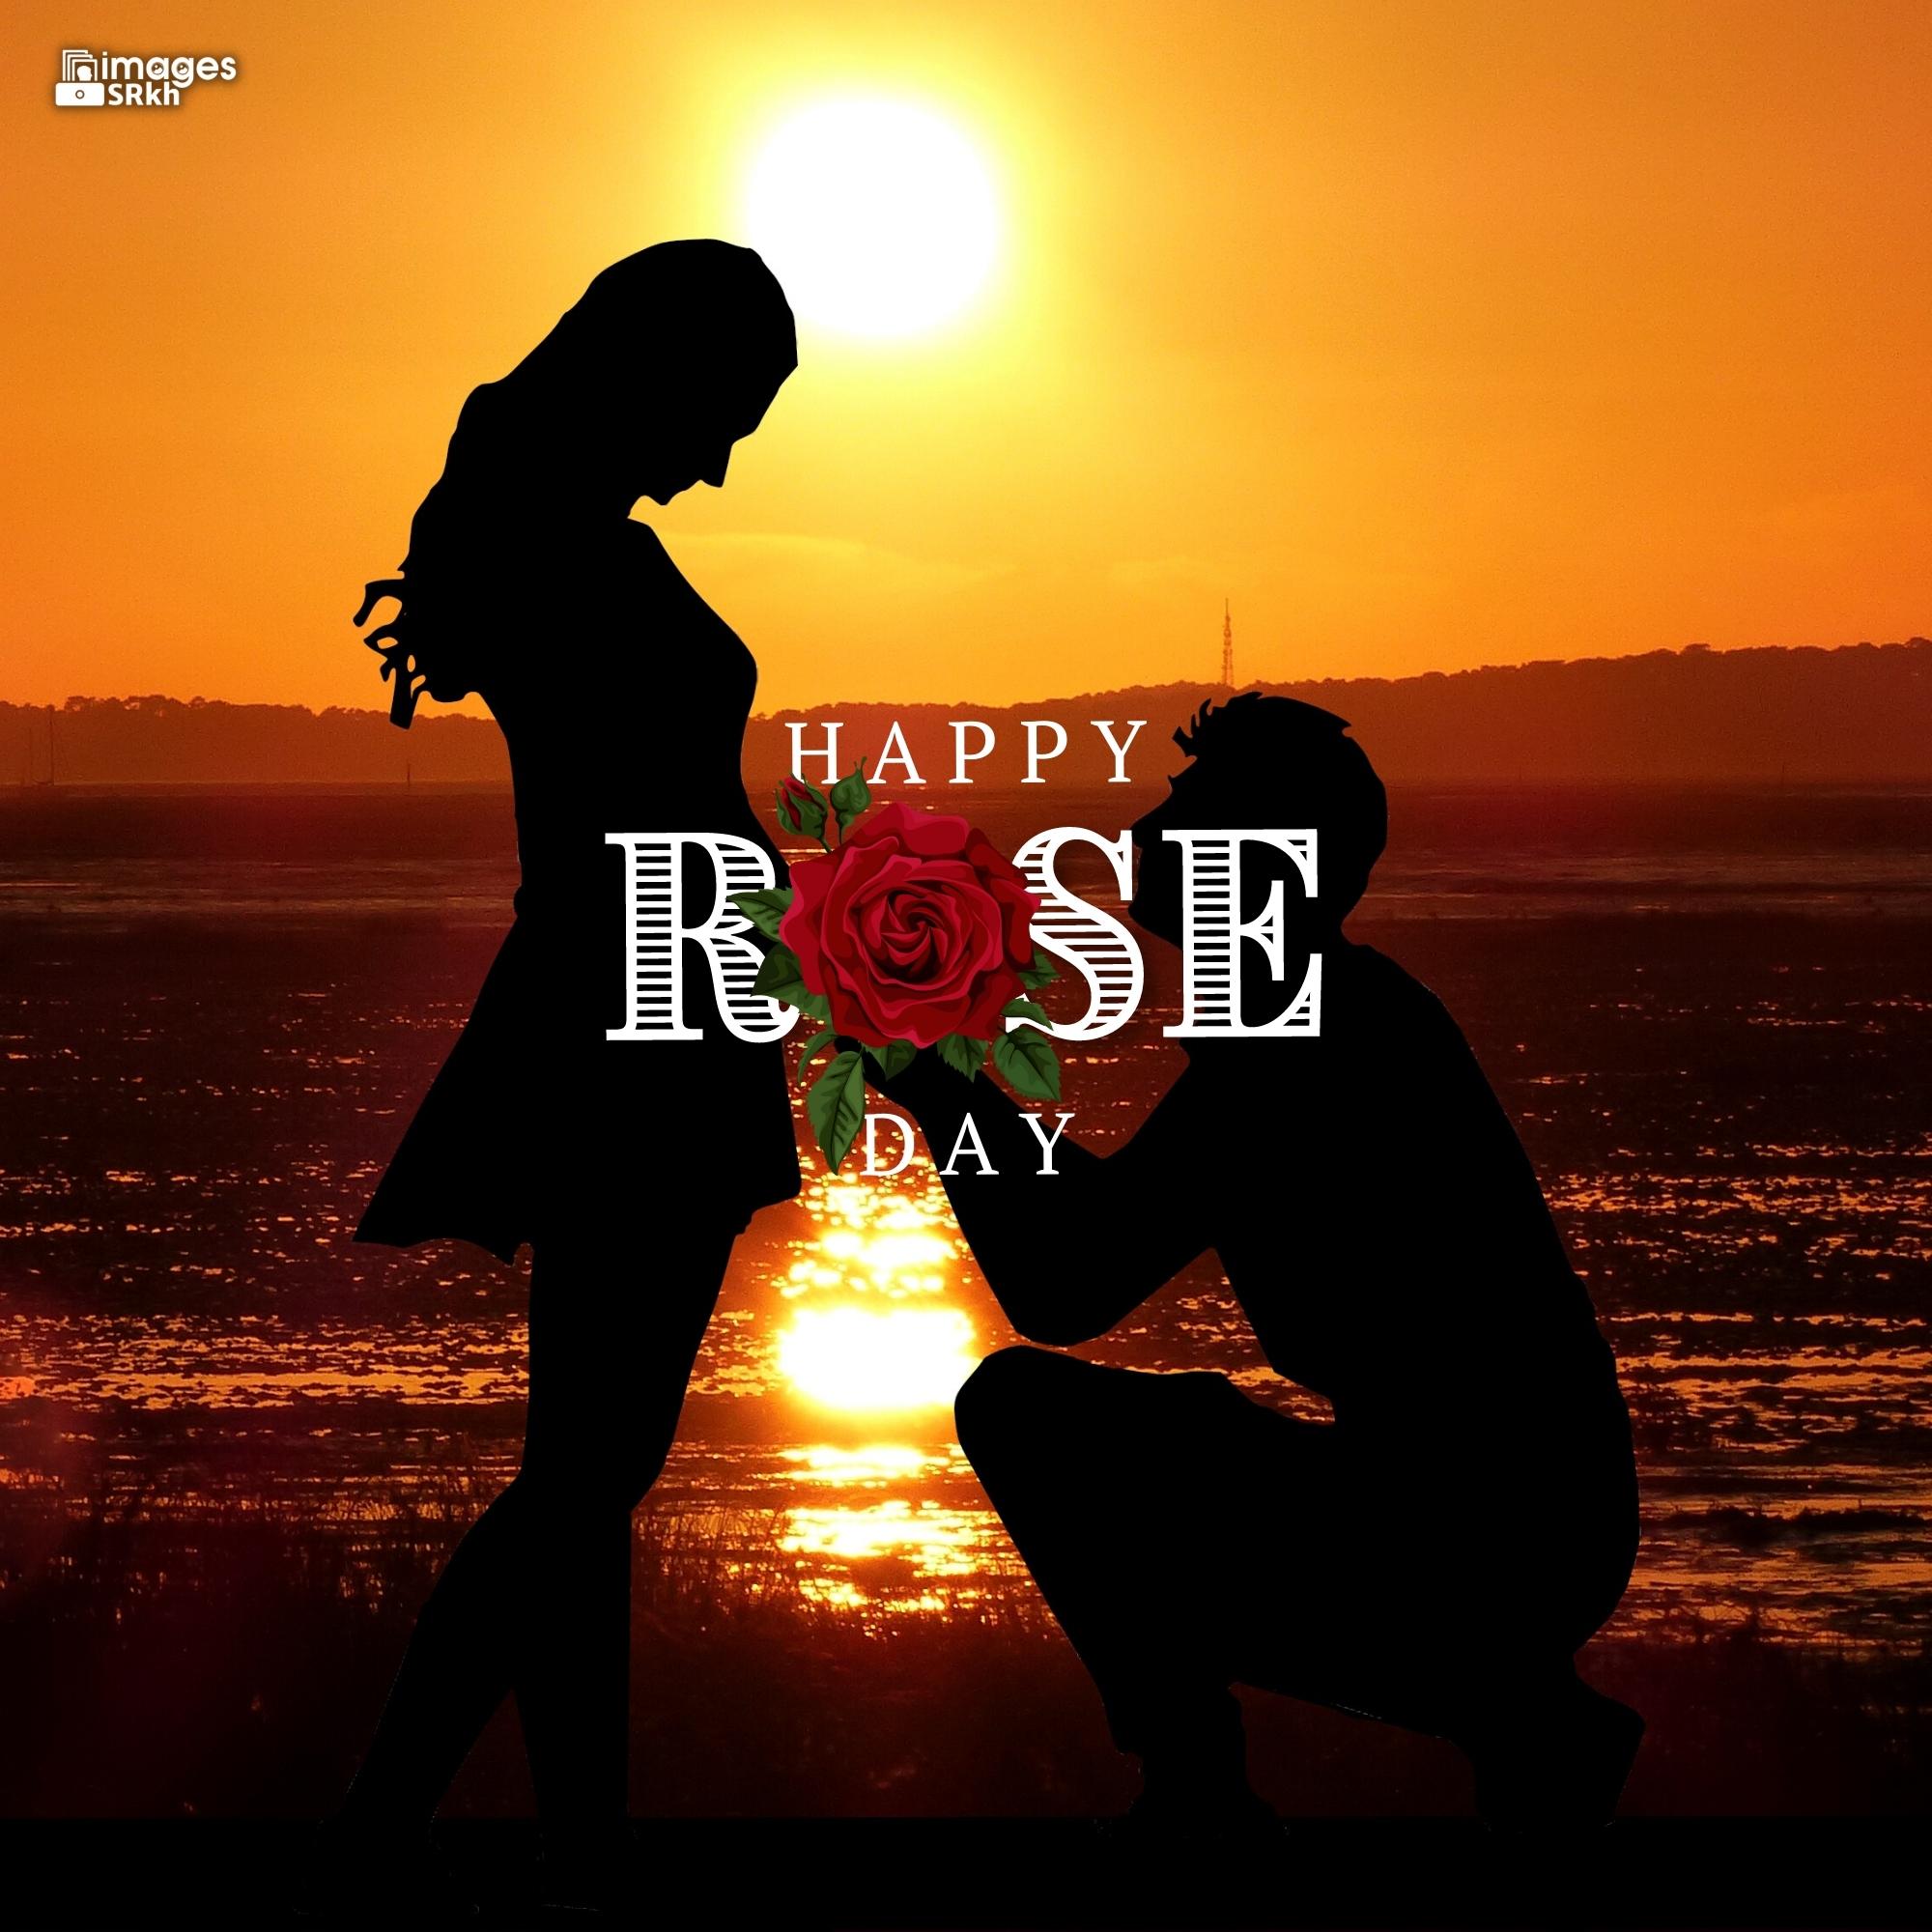 Romantic Rose Day Images Hd Download (13)